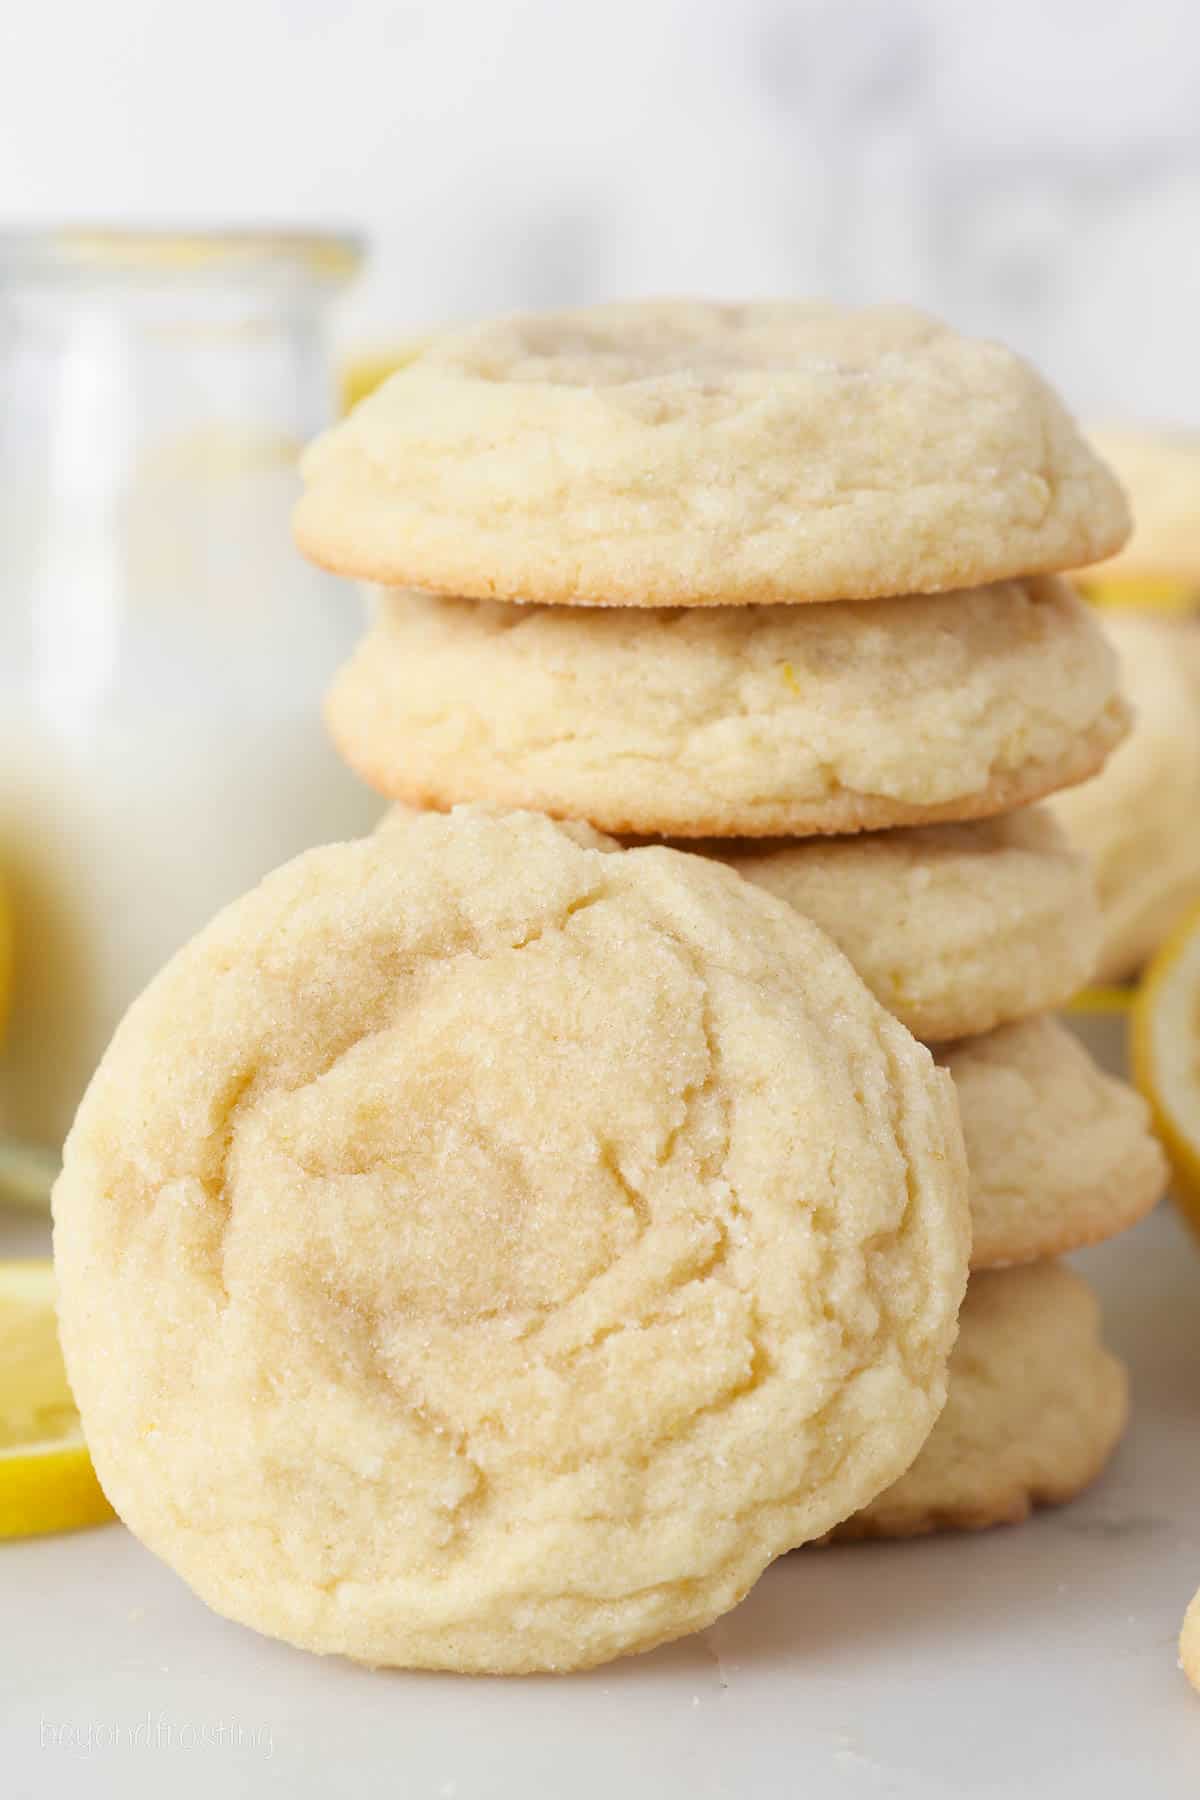 A lemon sugar cookie leaning against a stack of cookies.